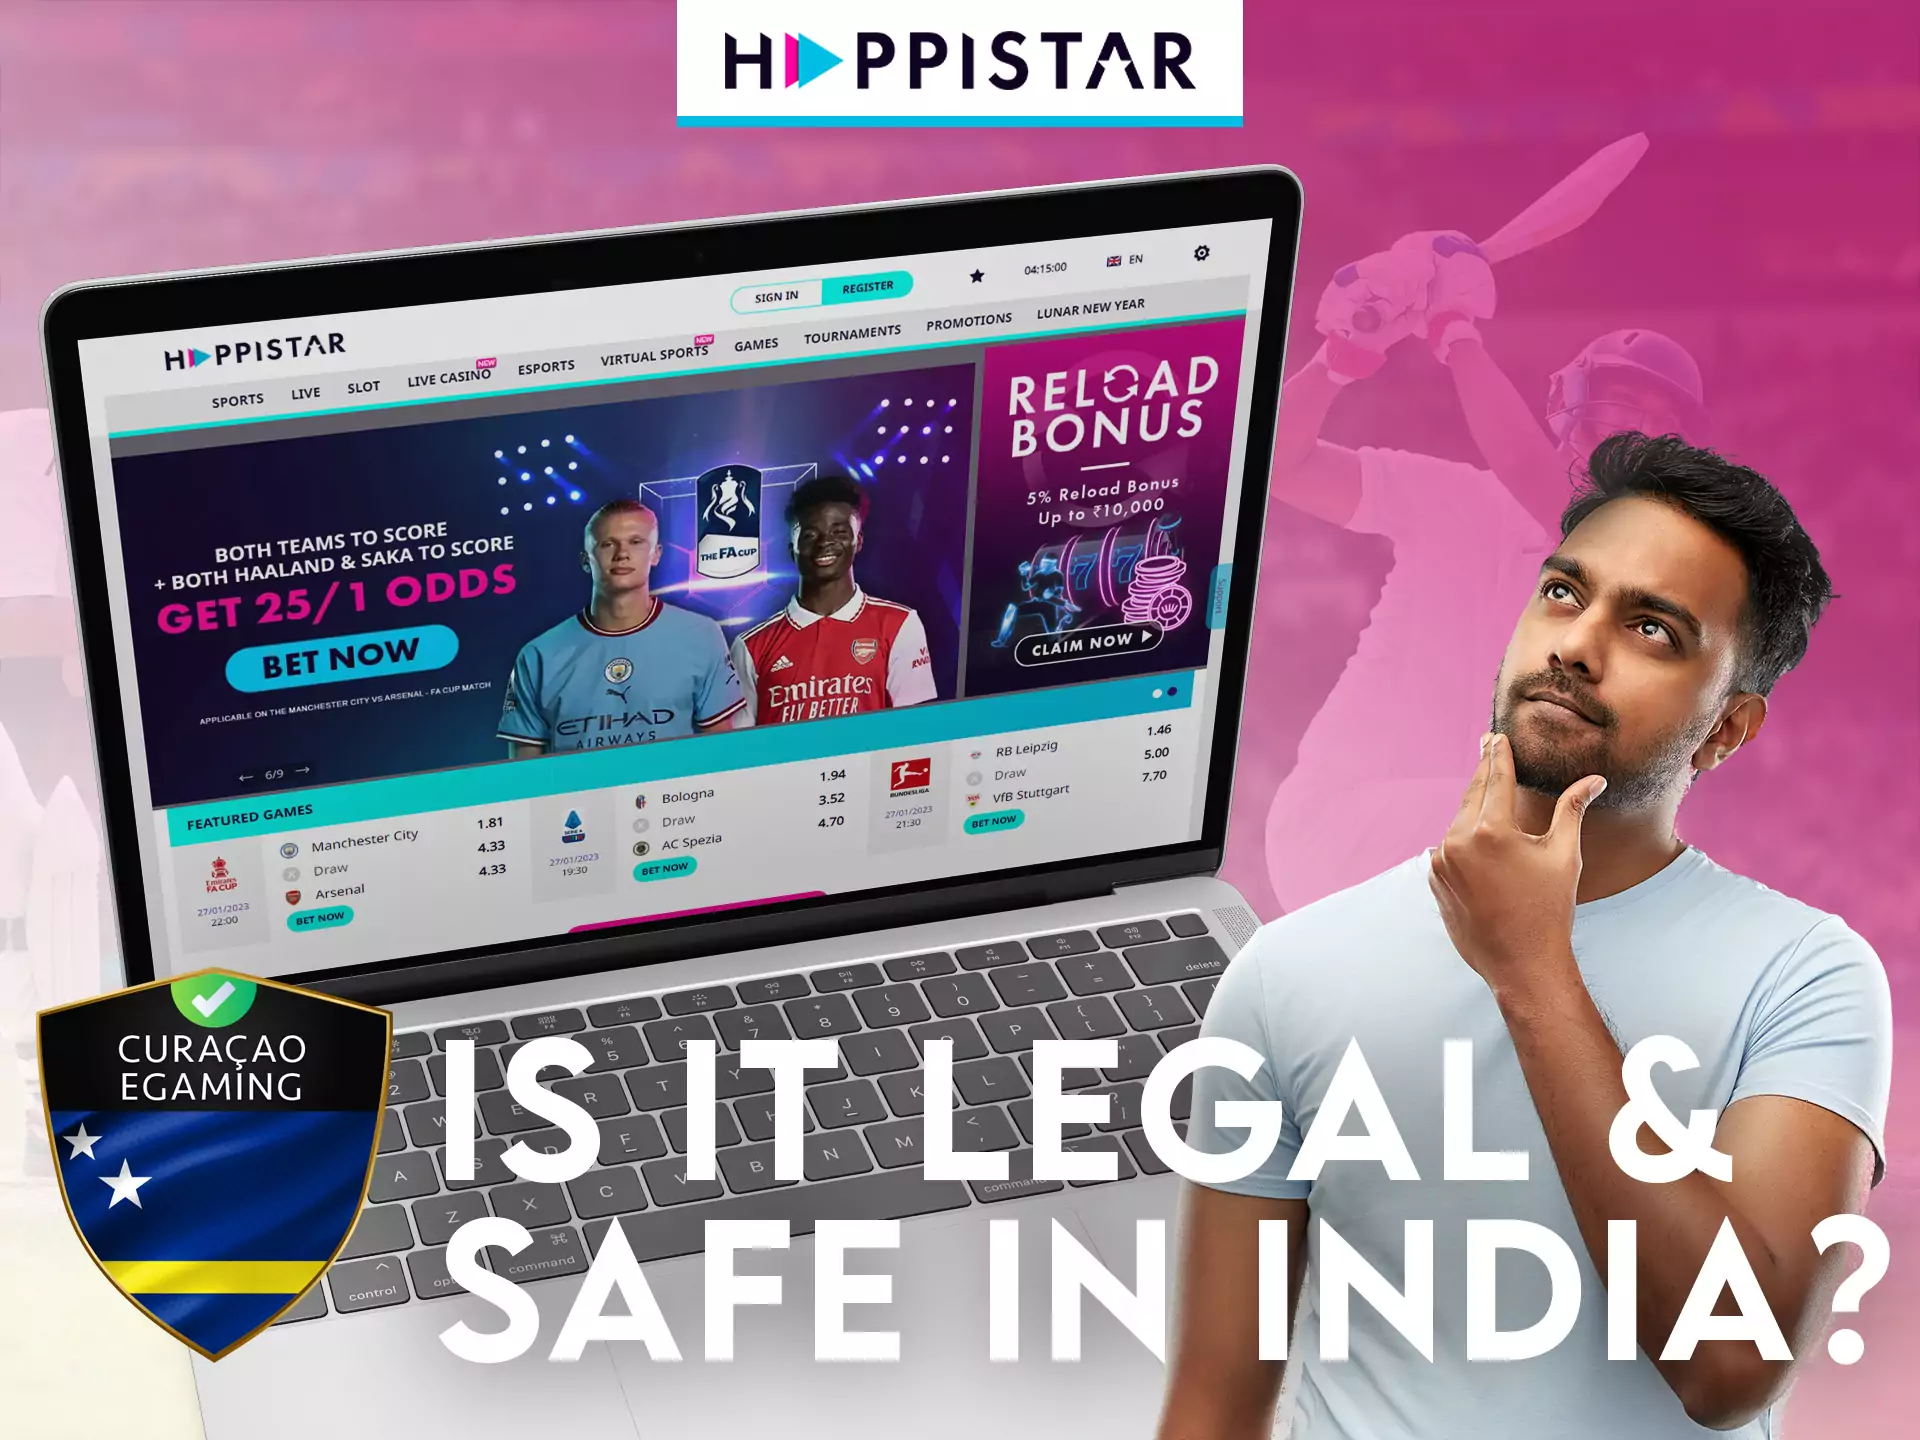 Happistar works legally online thanks to the official license.